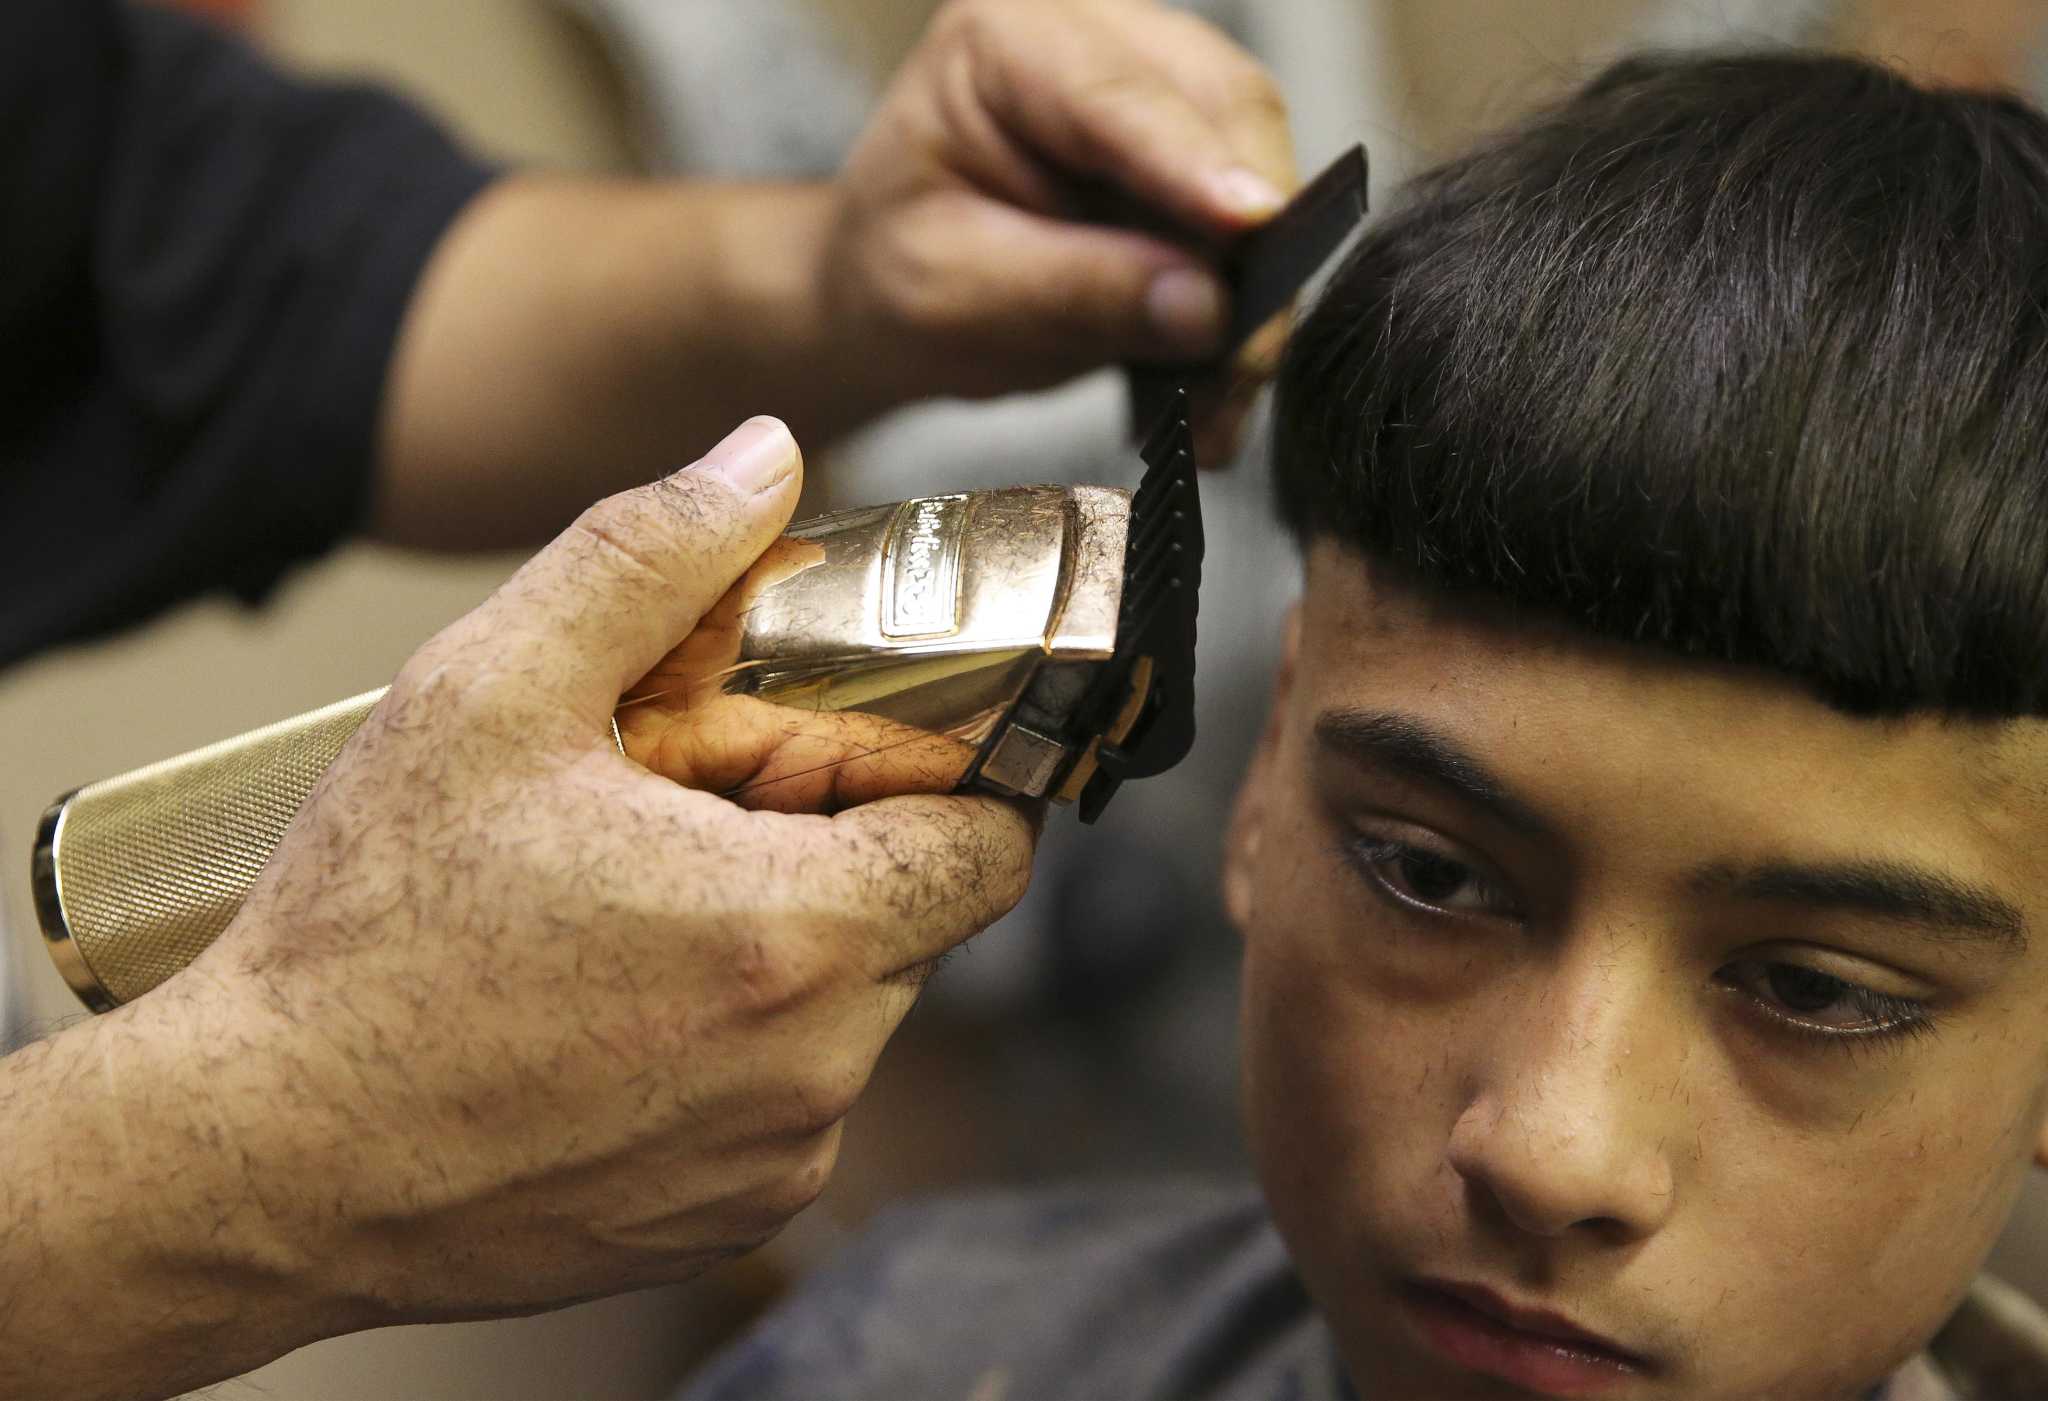 The 'Edgar' haircut San Antonio makes fun of might be rooted in indigenous  culture